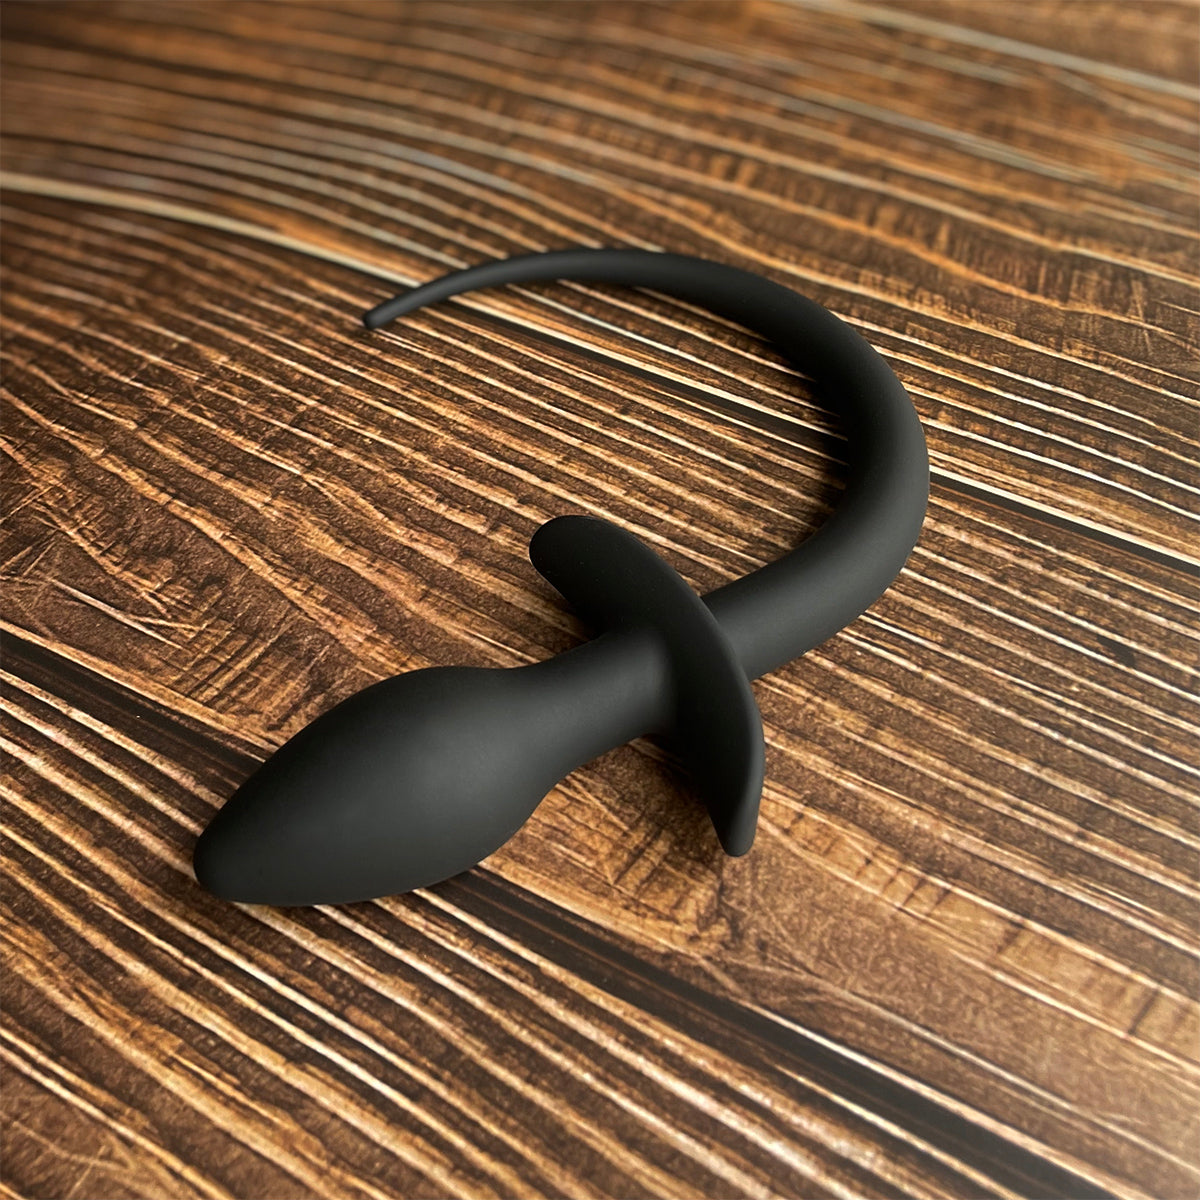 Silicone Puppy Tail Anal Plug